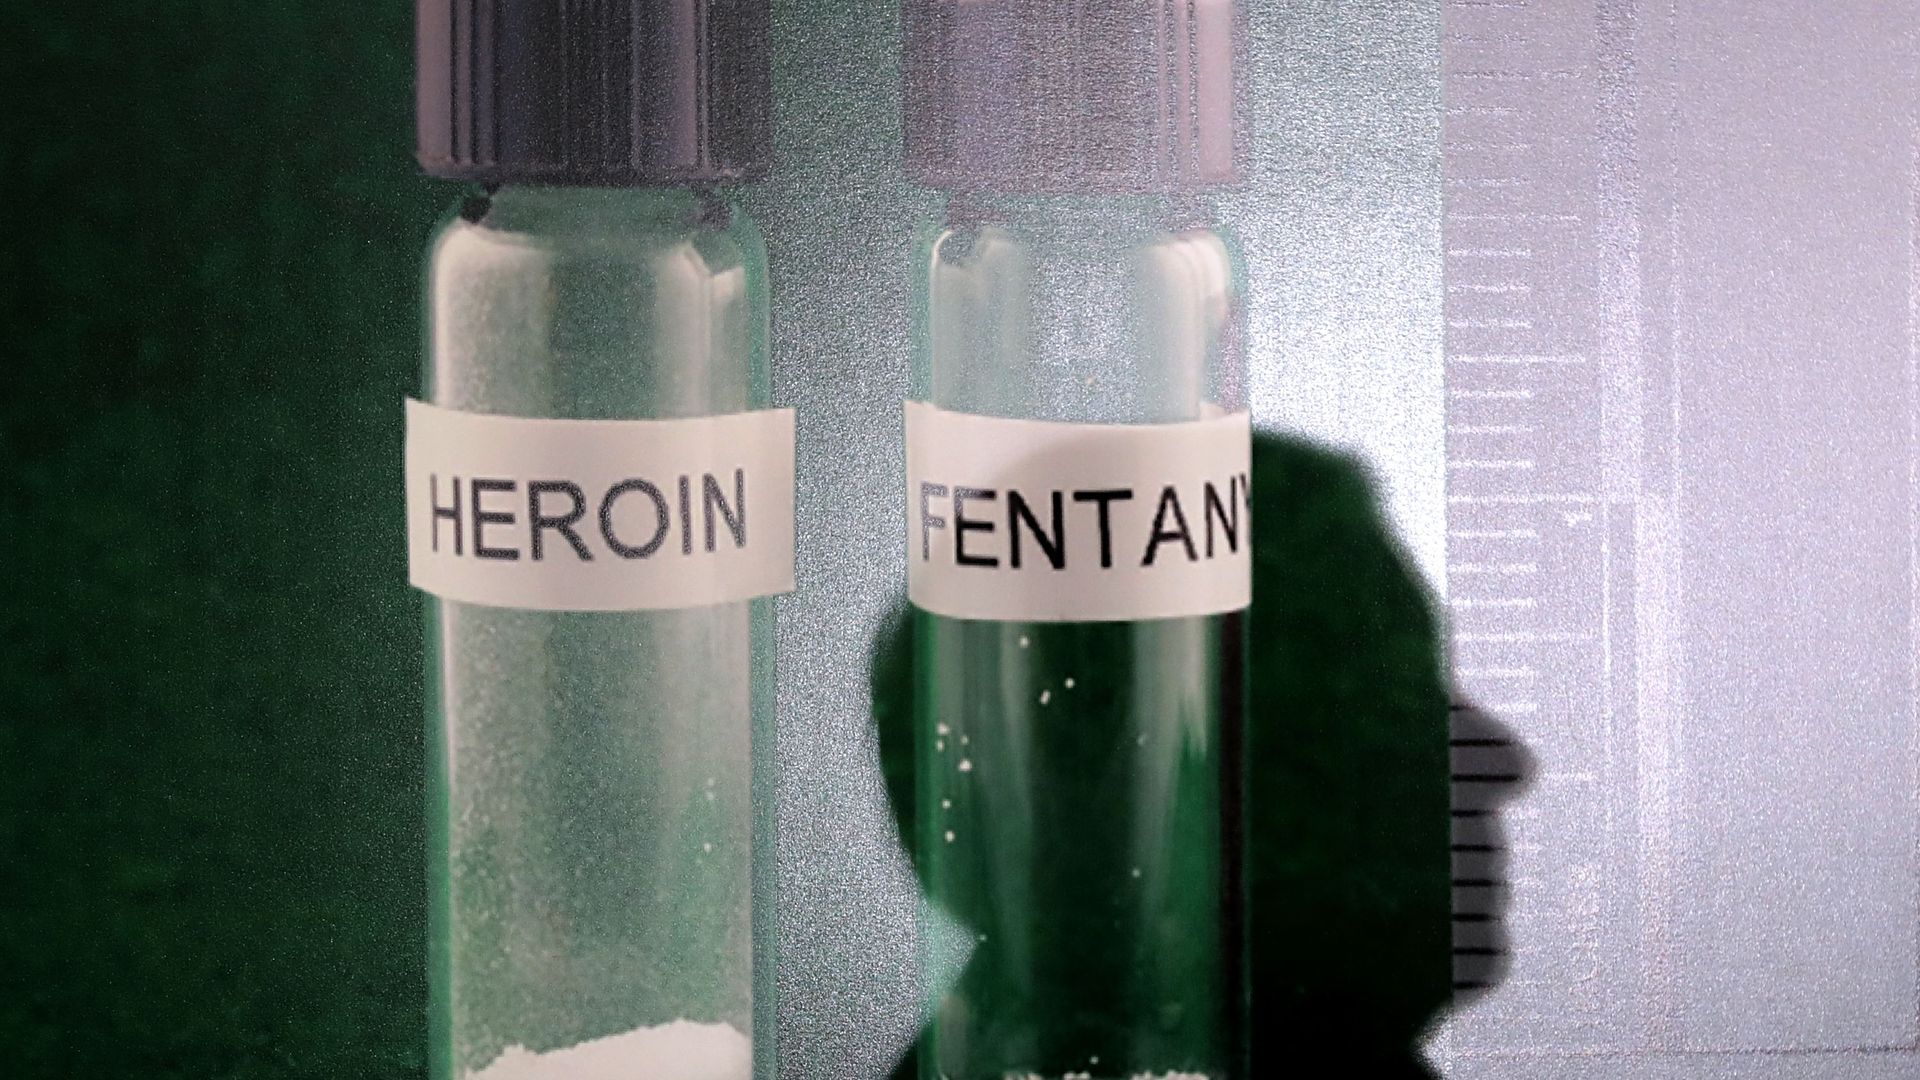 Containers of heroin and fentanyl